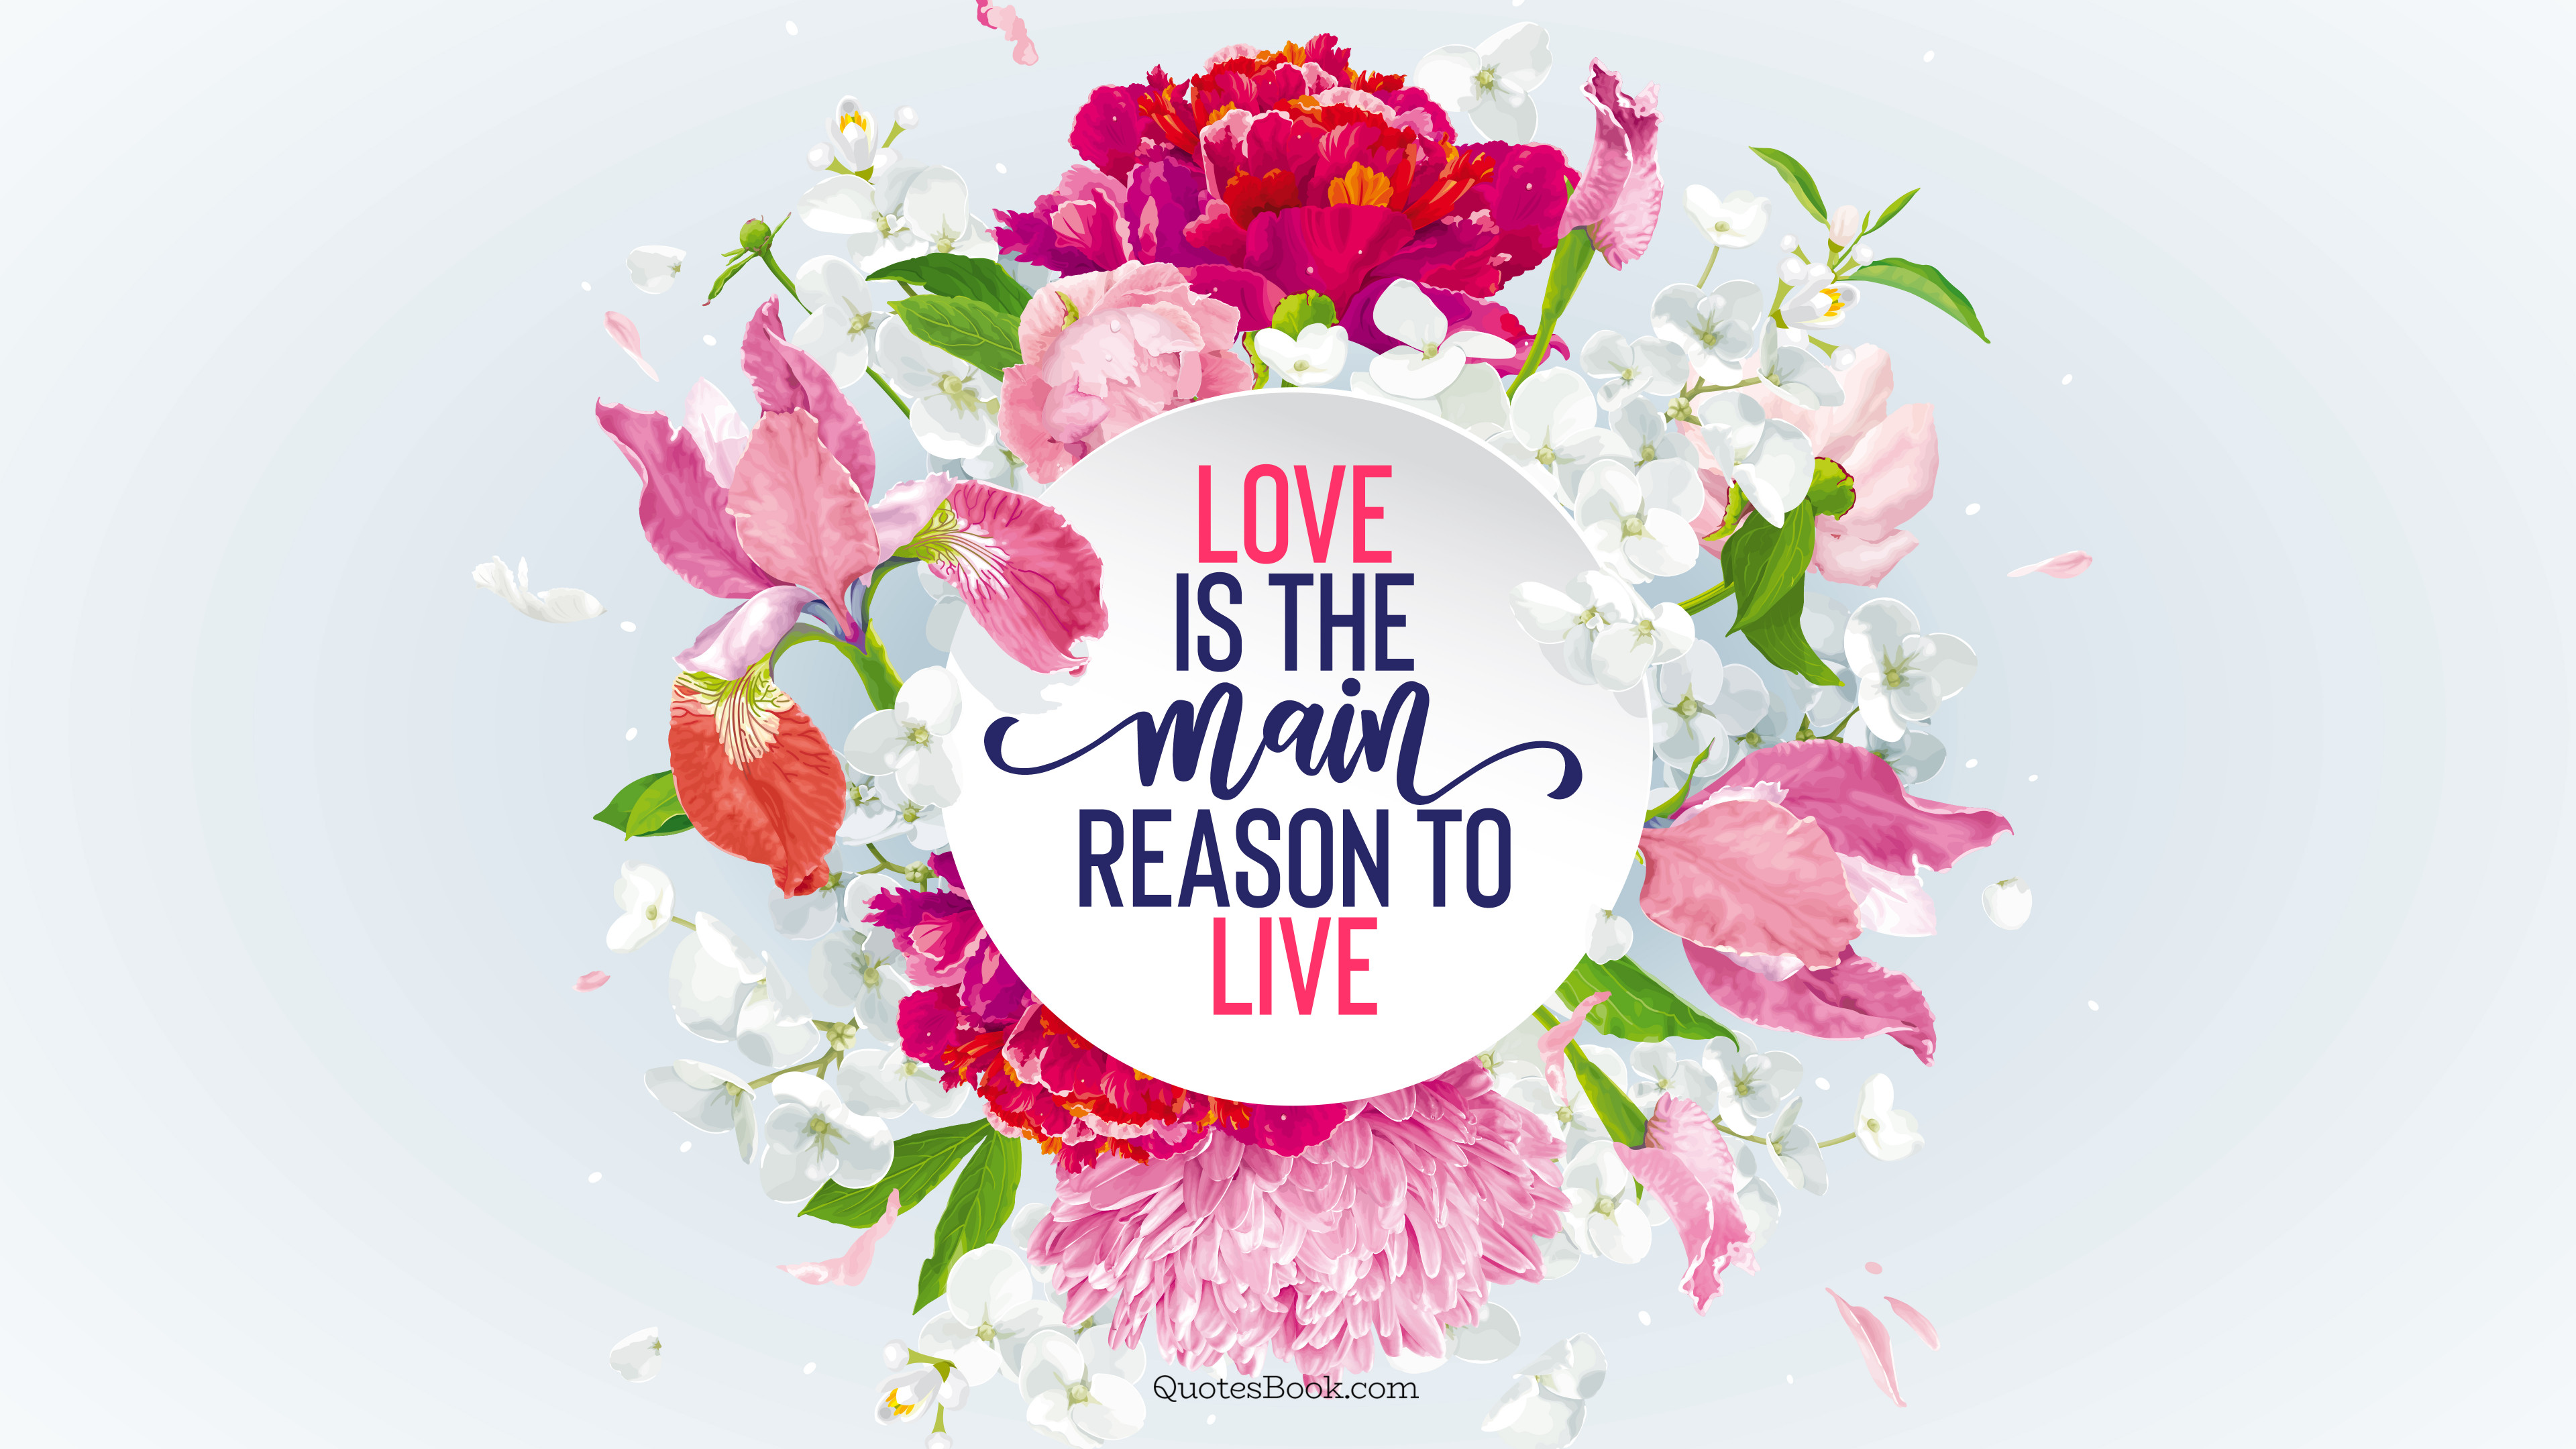 Love is the main reason to live - QuotesBook